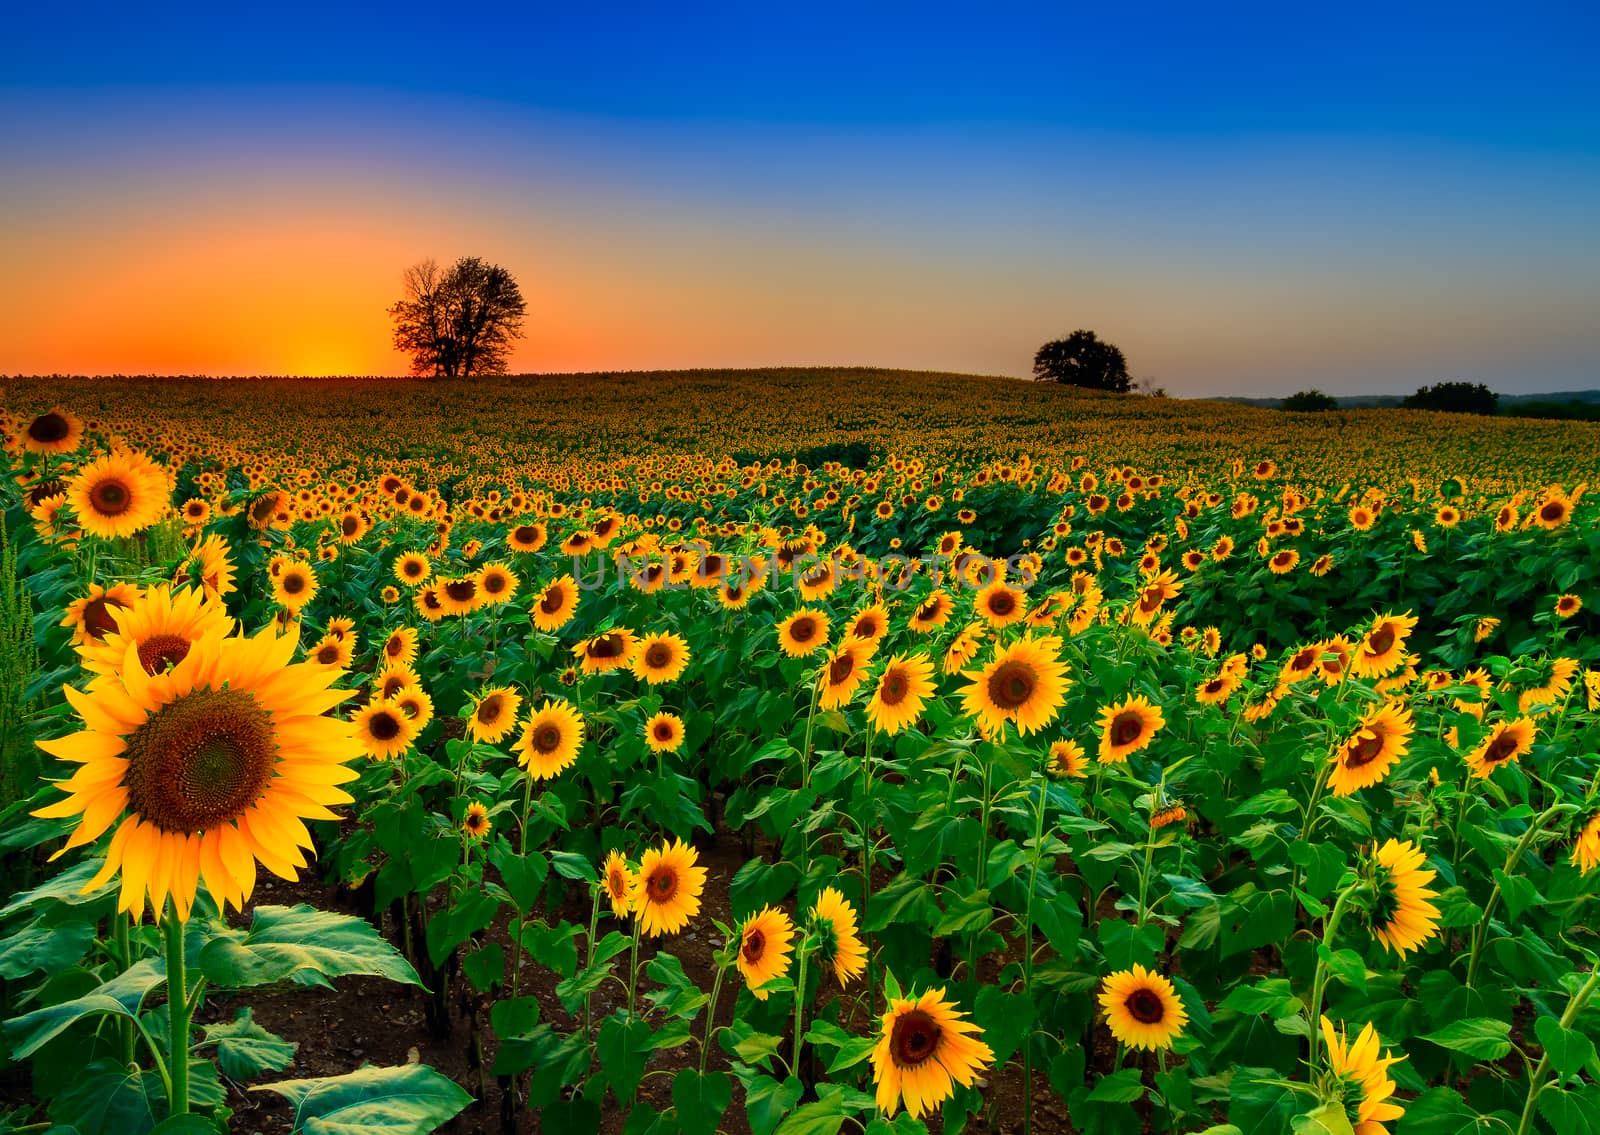 A rolling field of sunflowers at dusk in Kansas